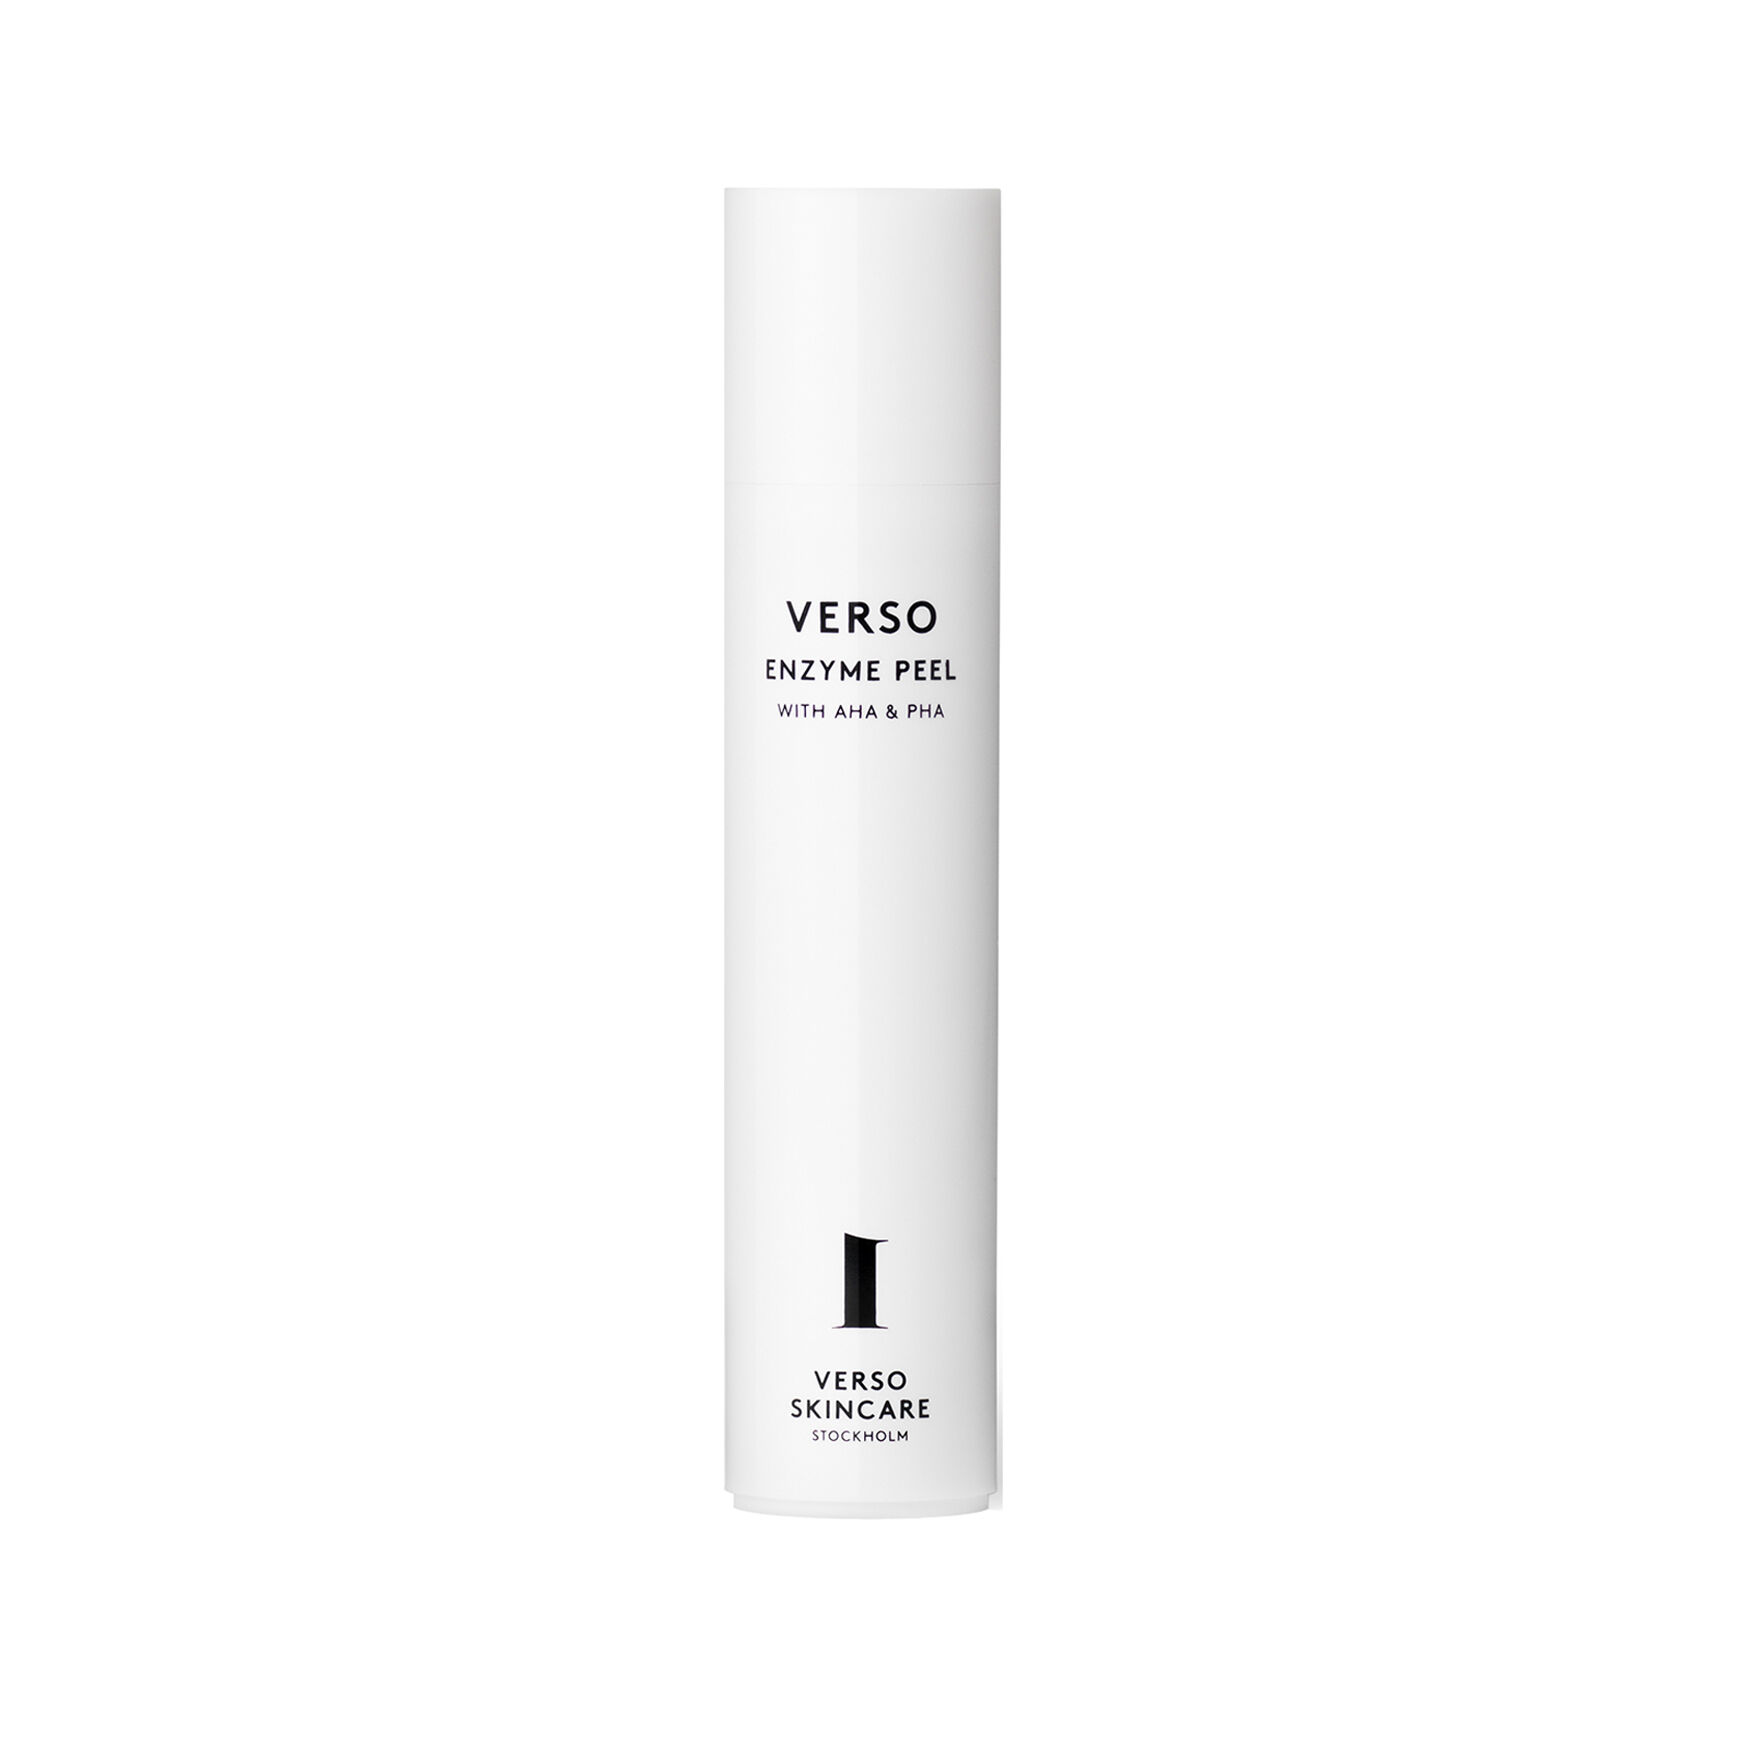 VERSO - Enzyme Peel by Verso